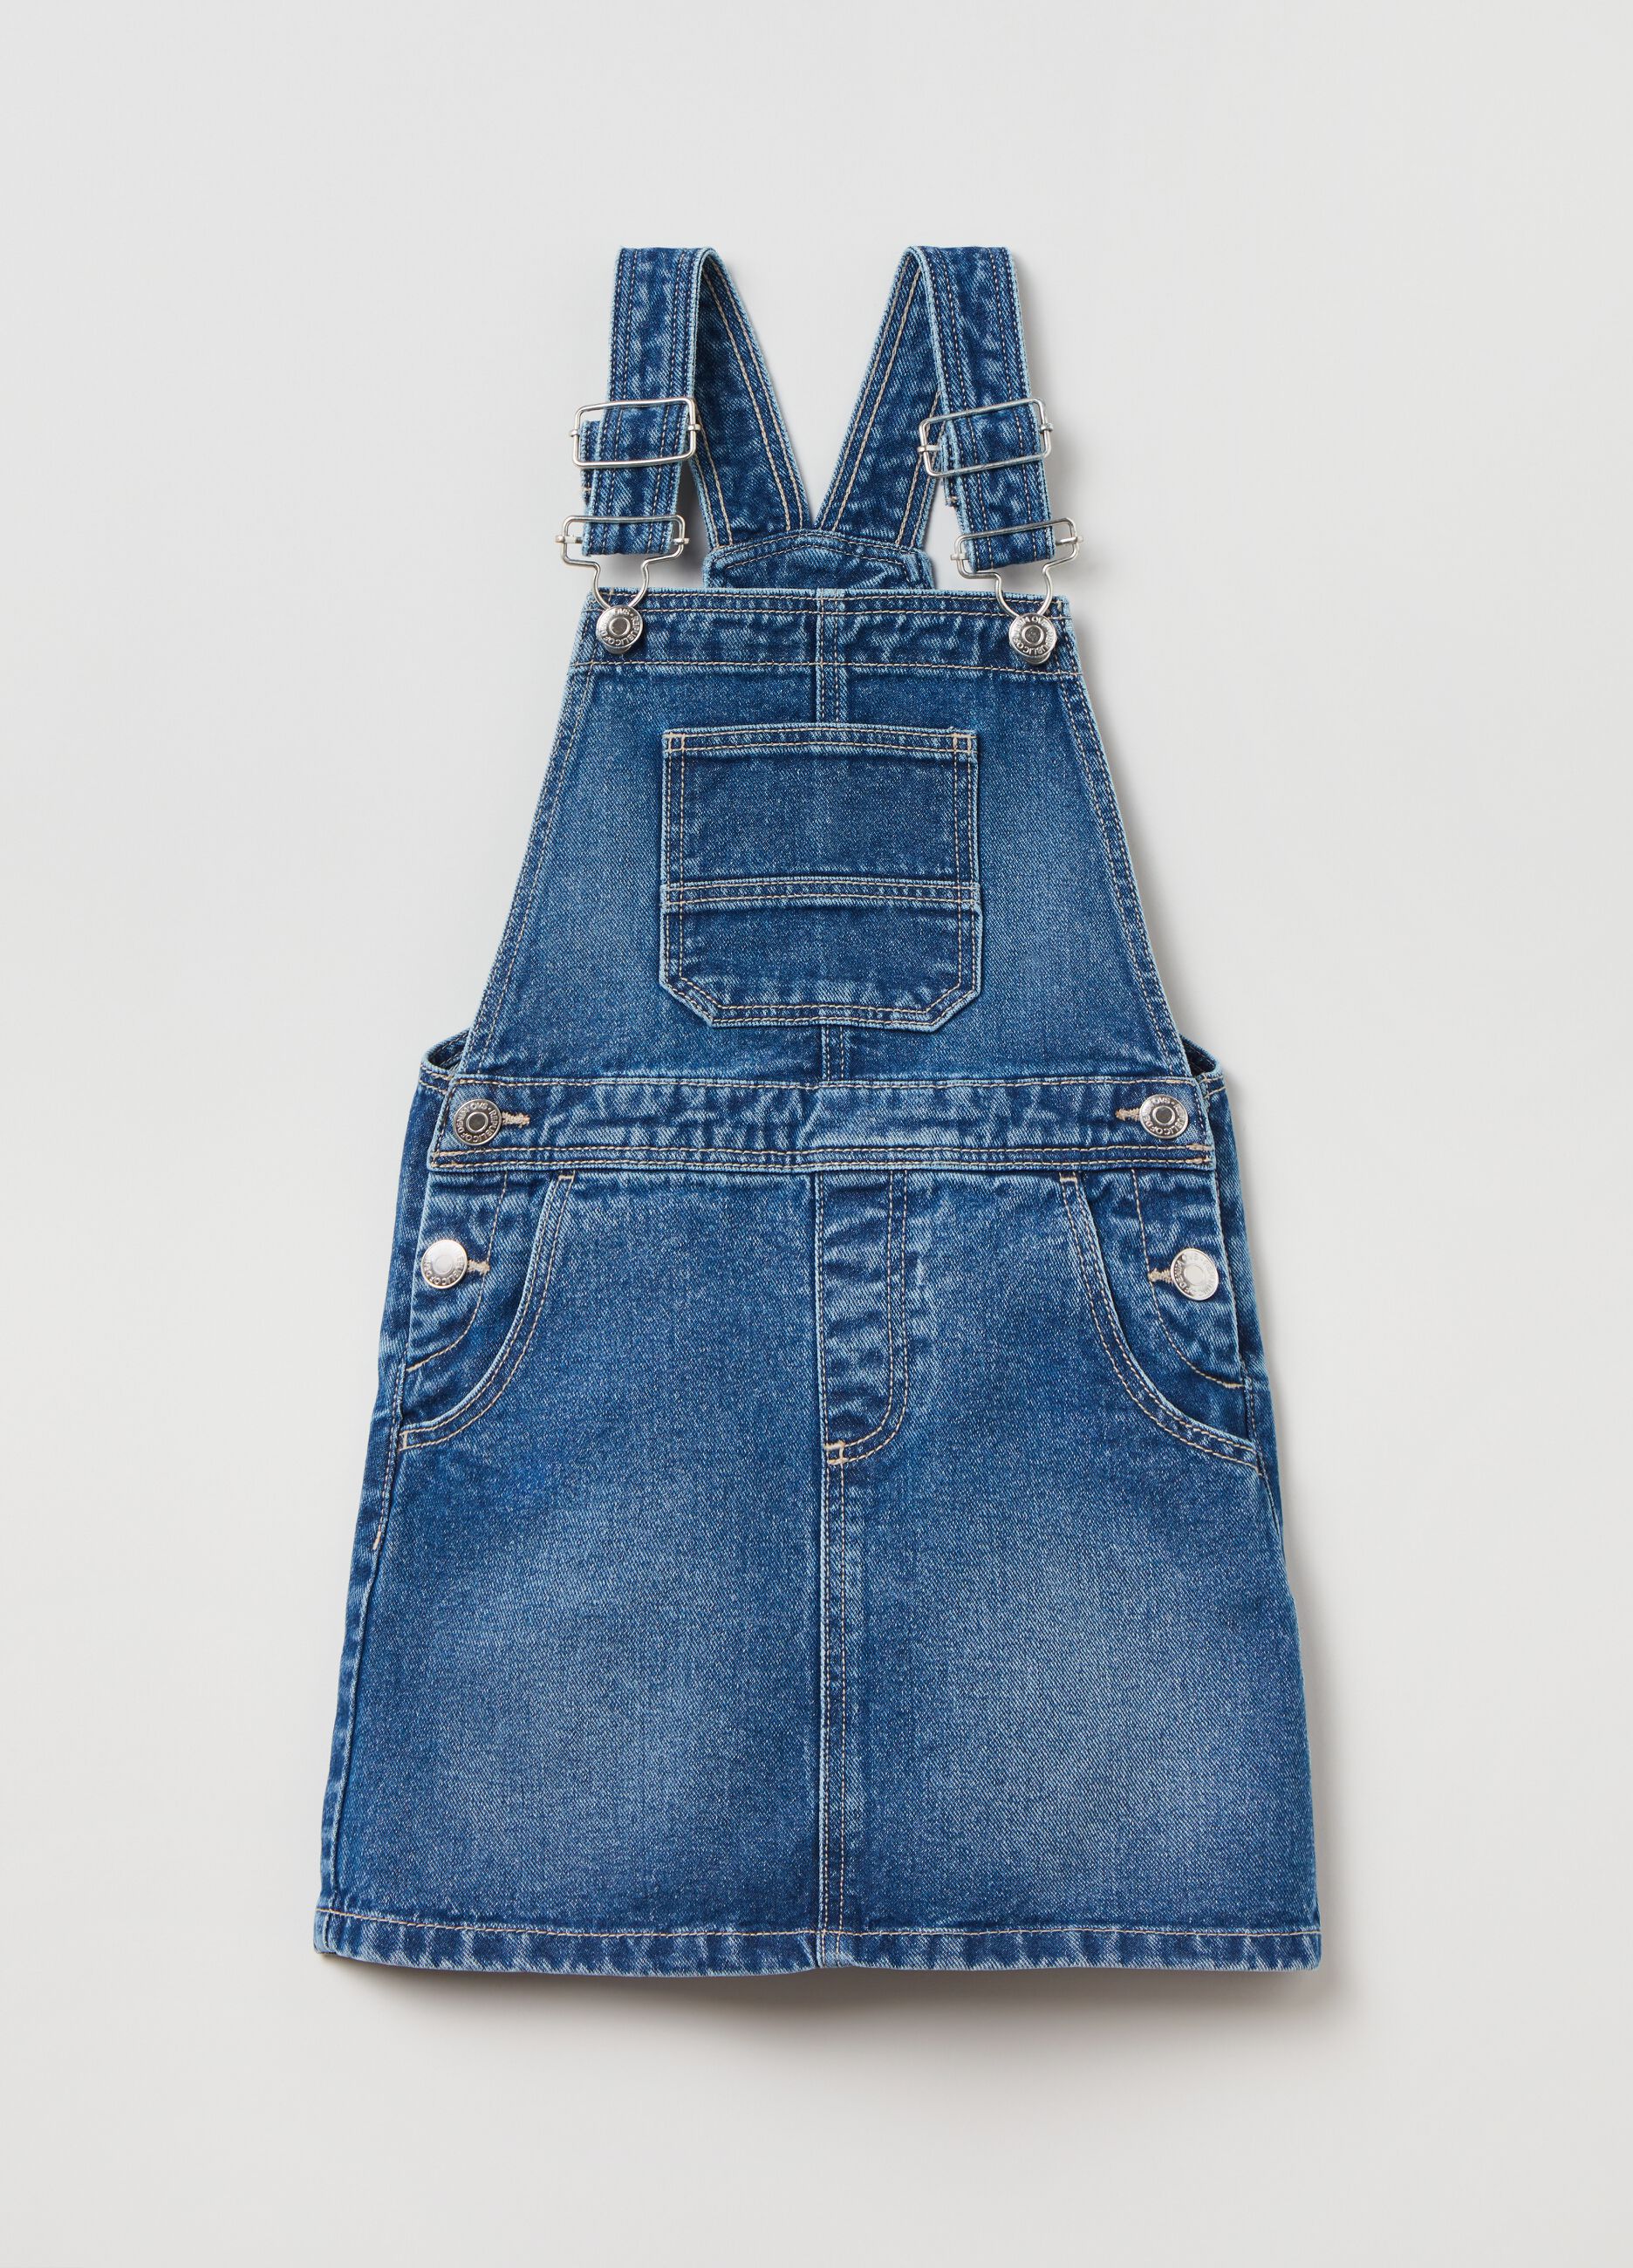 Dungaree dress in denim with pockets